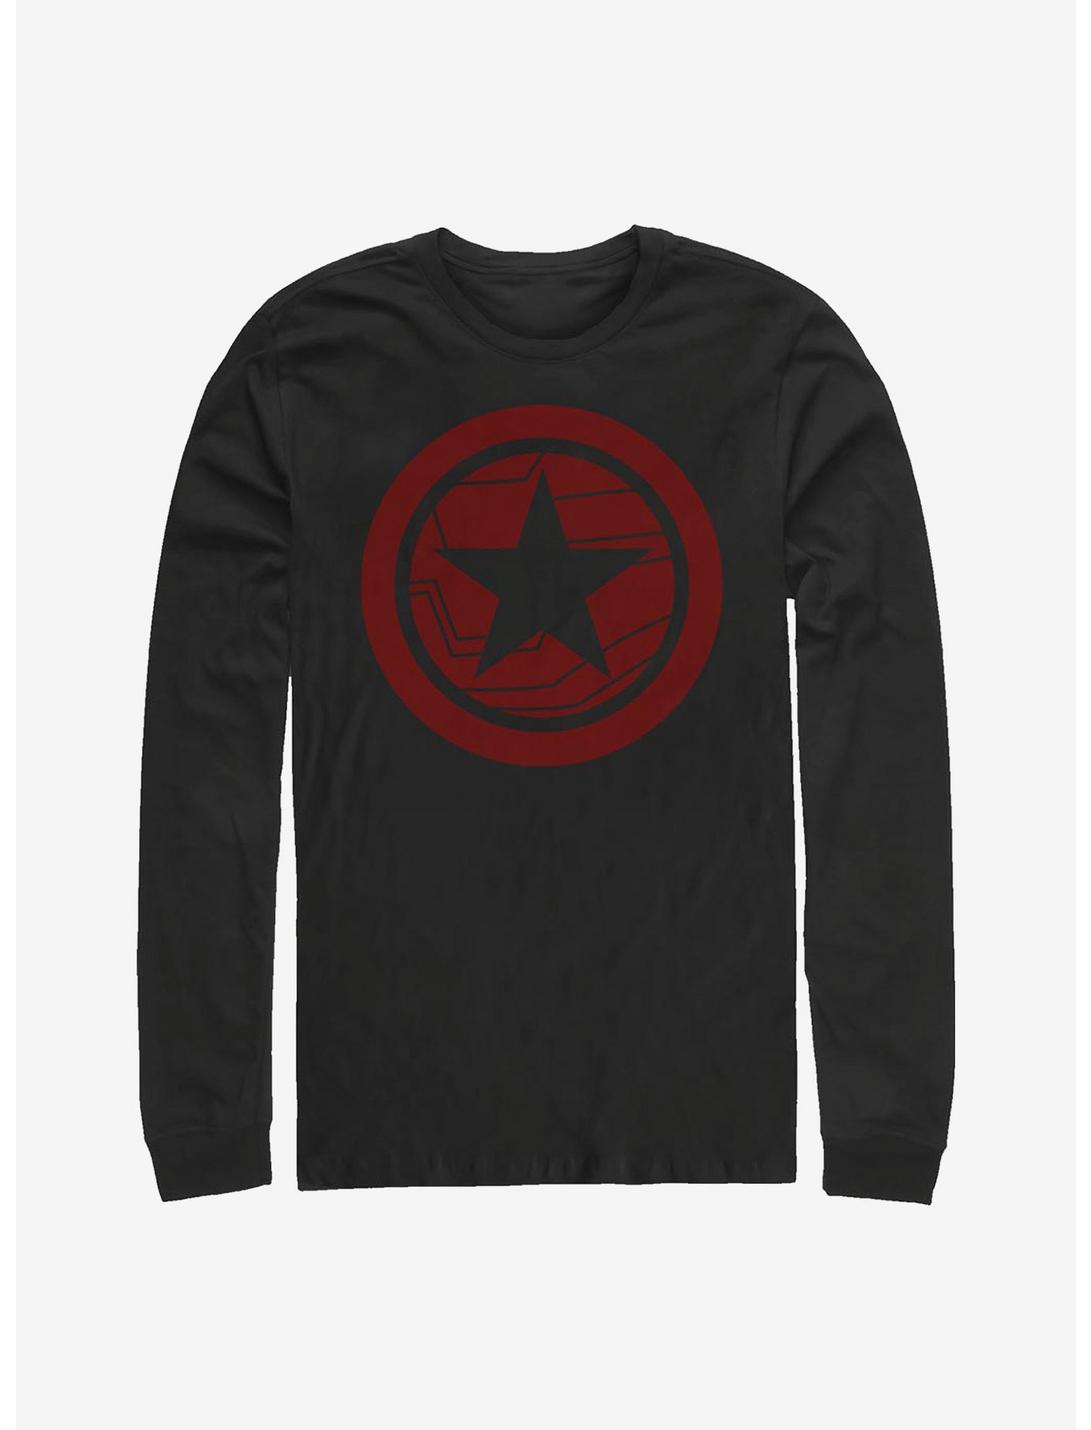 Marvel The Falcon And The Winter Soldier Red Shield Long-Sleeve T-Shirt, BLACK, hi-res